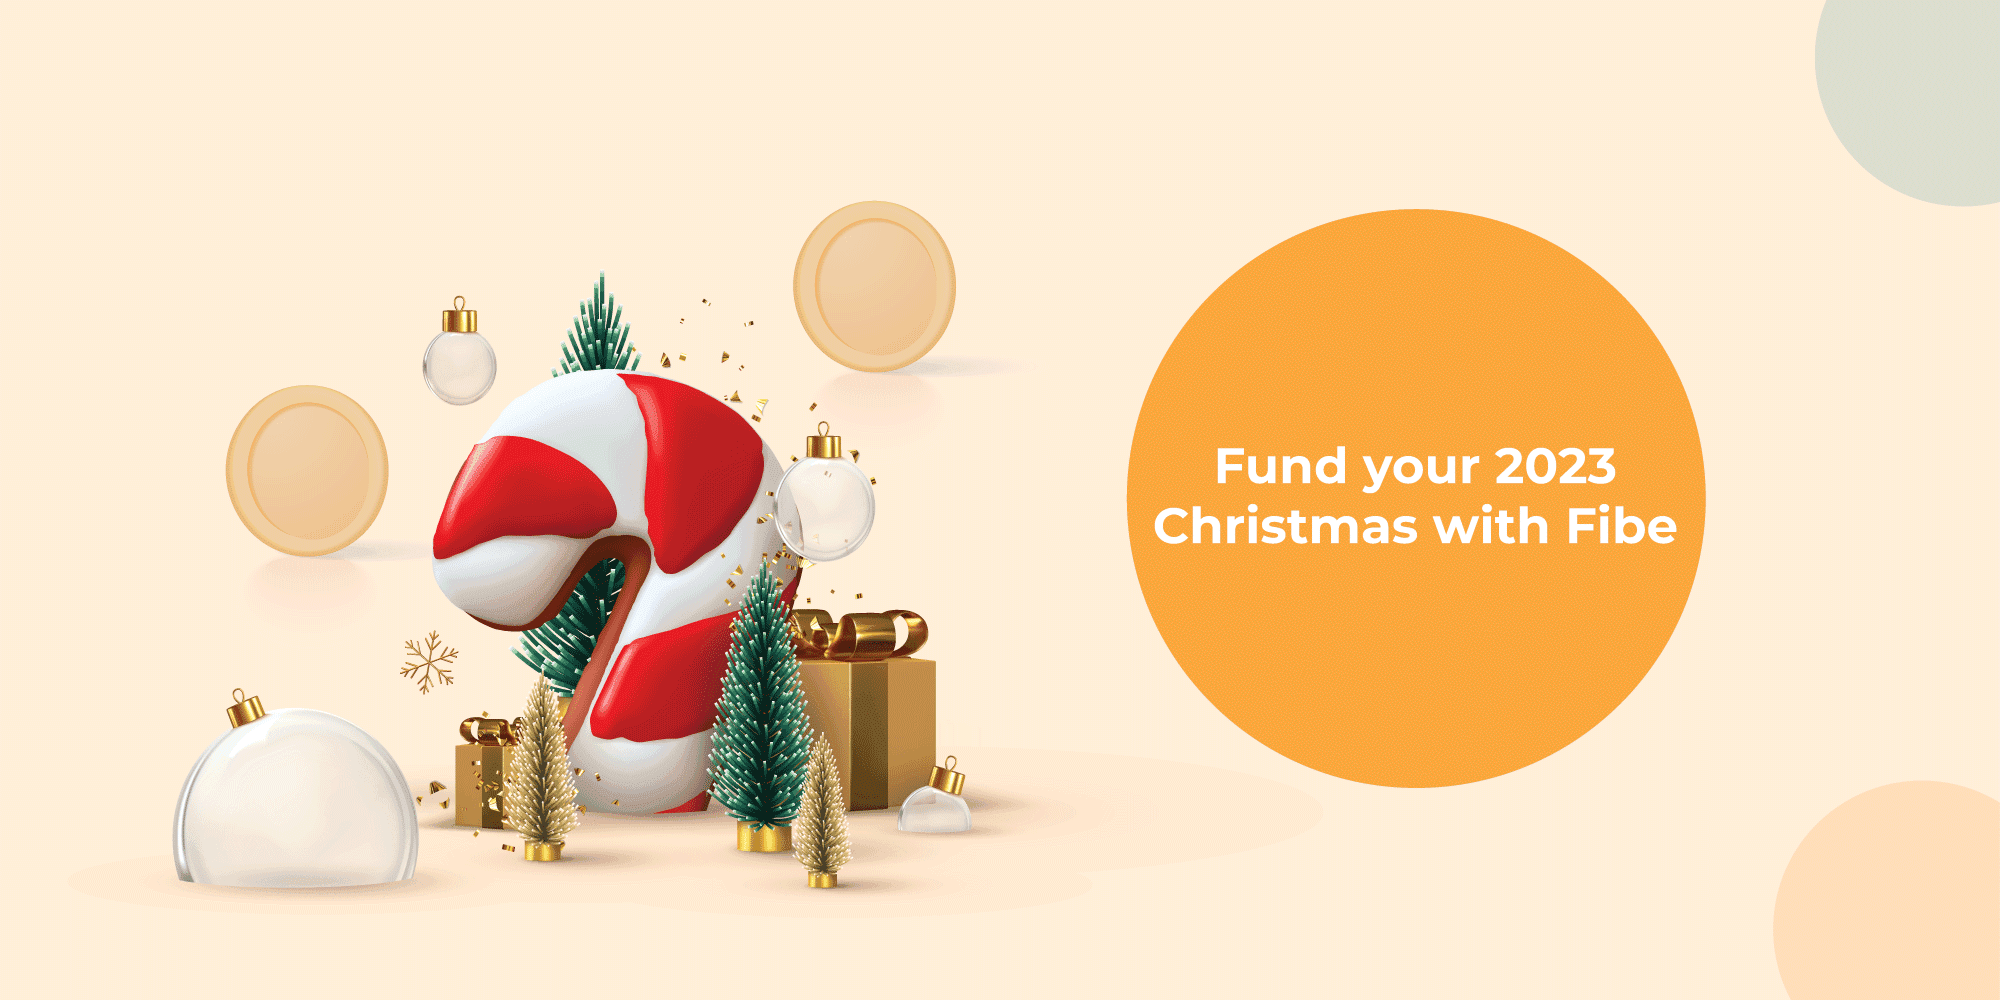 Celebrate your Christmas Holiday with an Instant Loan from Fibe